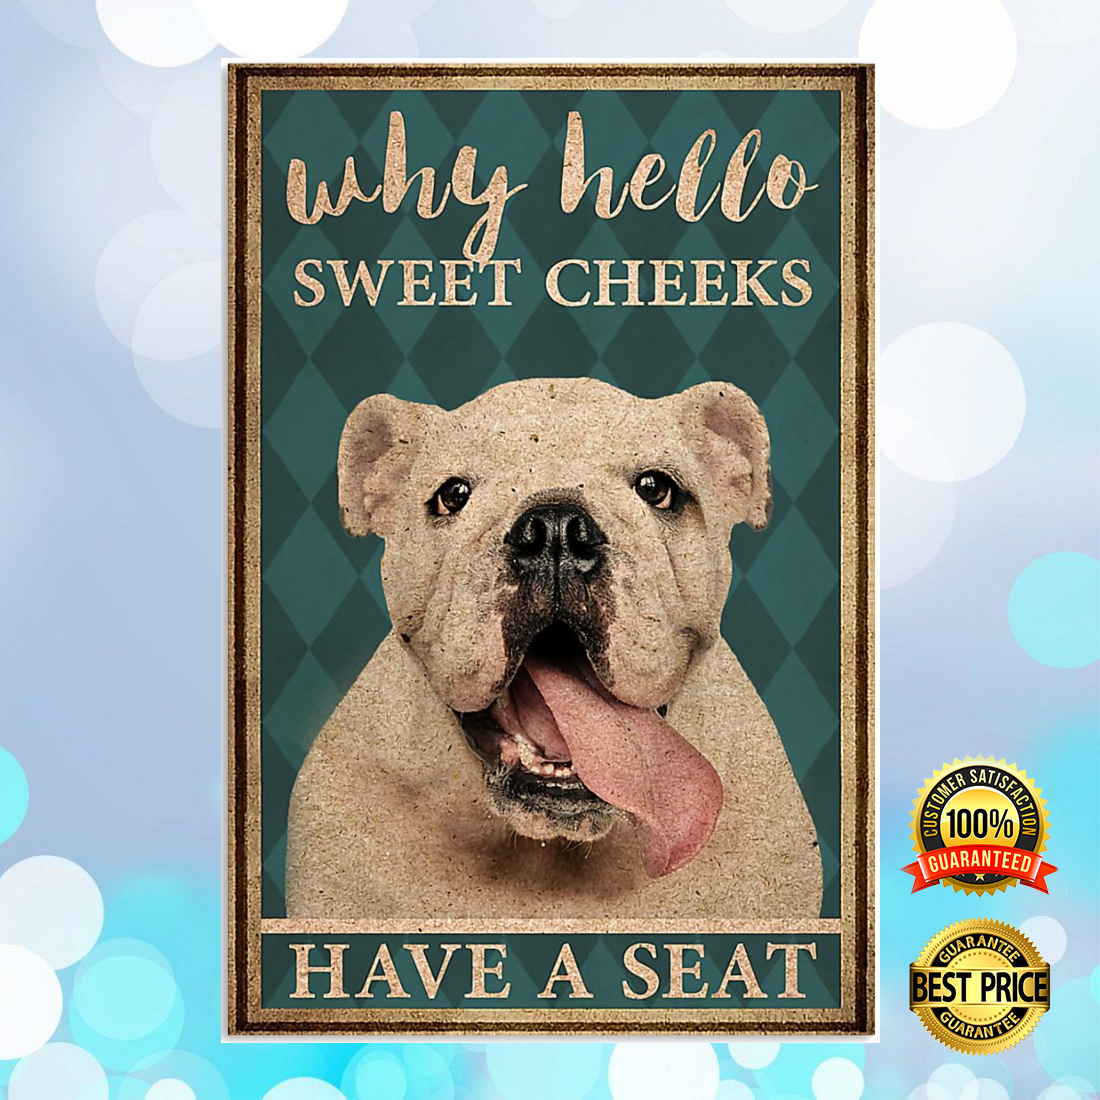 BULLDOG WHY HELLO SWEET CHEEKS HAVE A SEAT POSTER